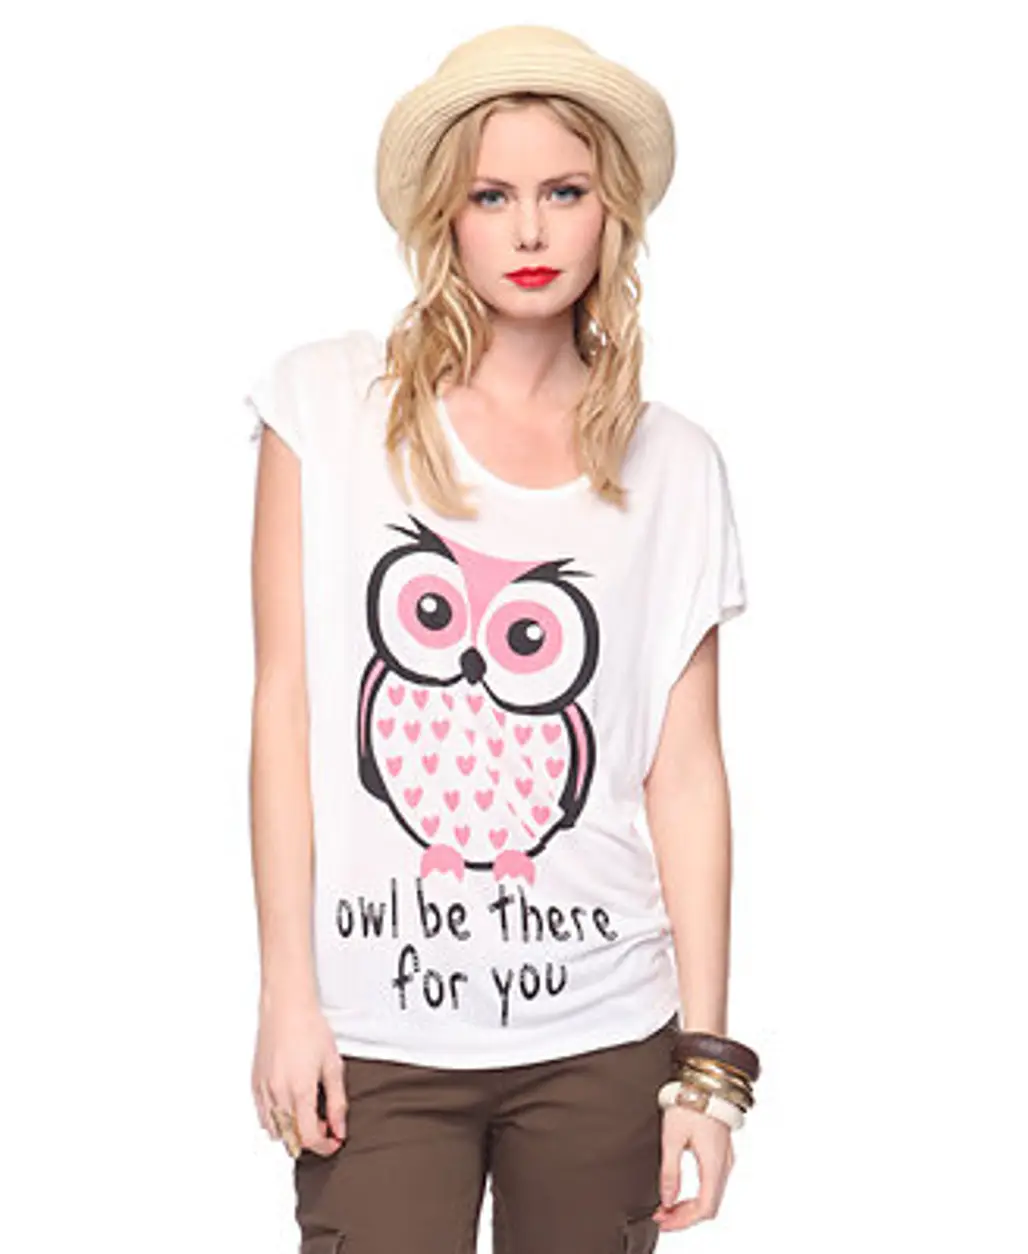 Forever21 Owl Be There for Your Tee